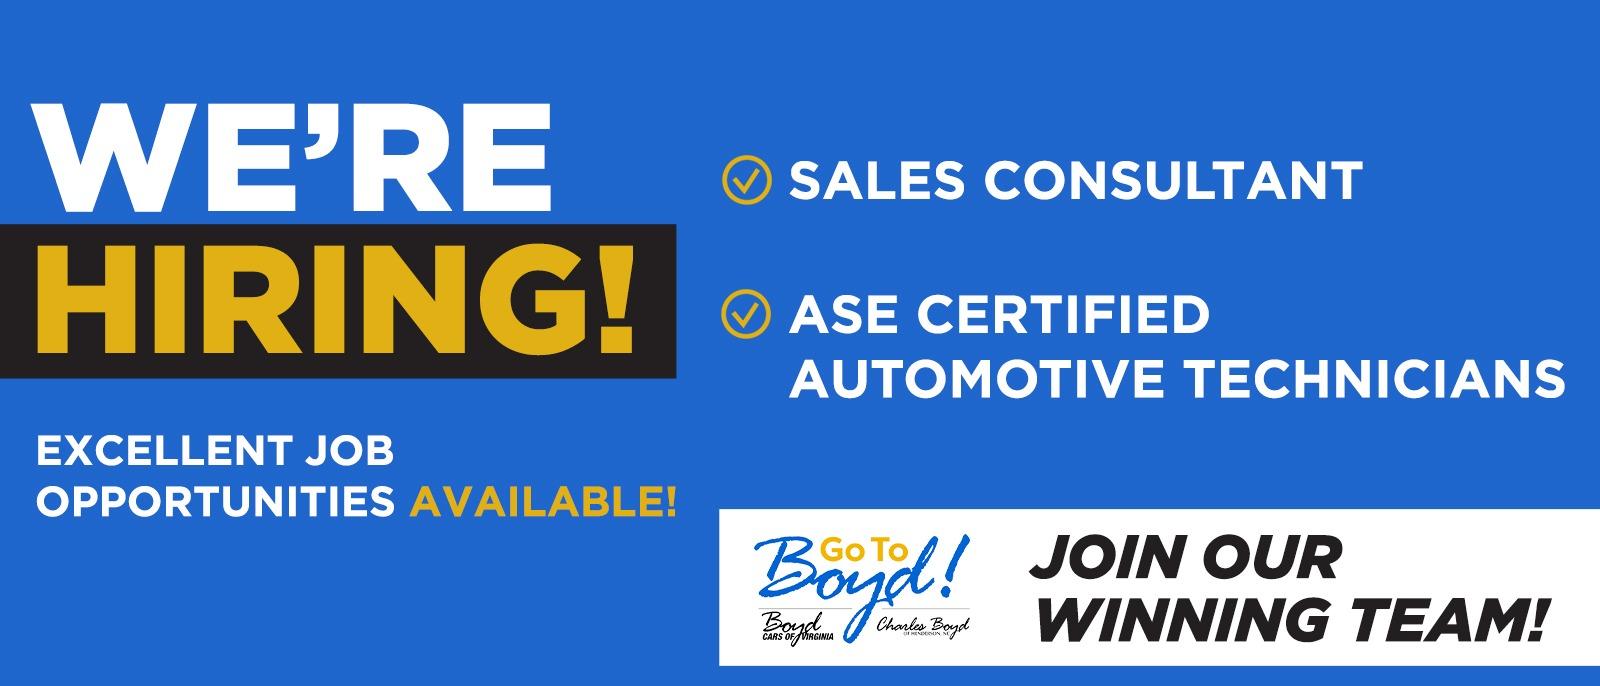 WE'RE HIRING! EXCELLENT JOB OPPORTUNITIES AVAILABLE! SALES CONSULTANT ASE CERTIFIED AUTOMOTIVE TECHNICIANS